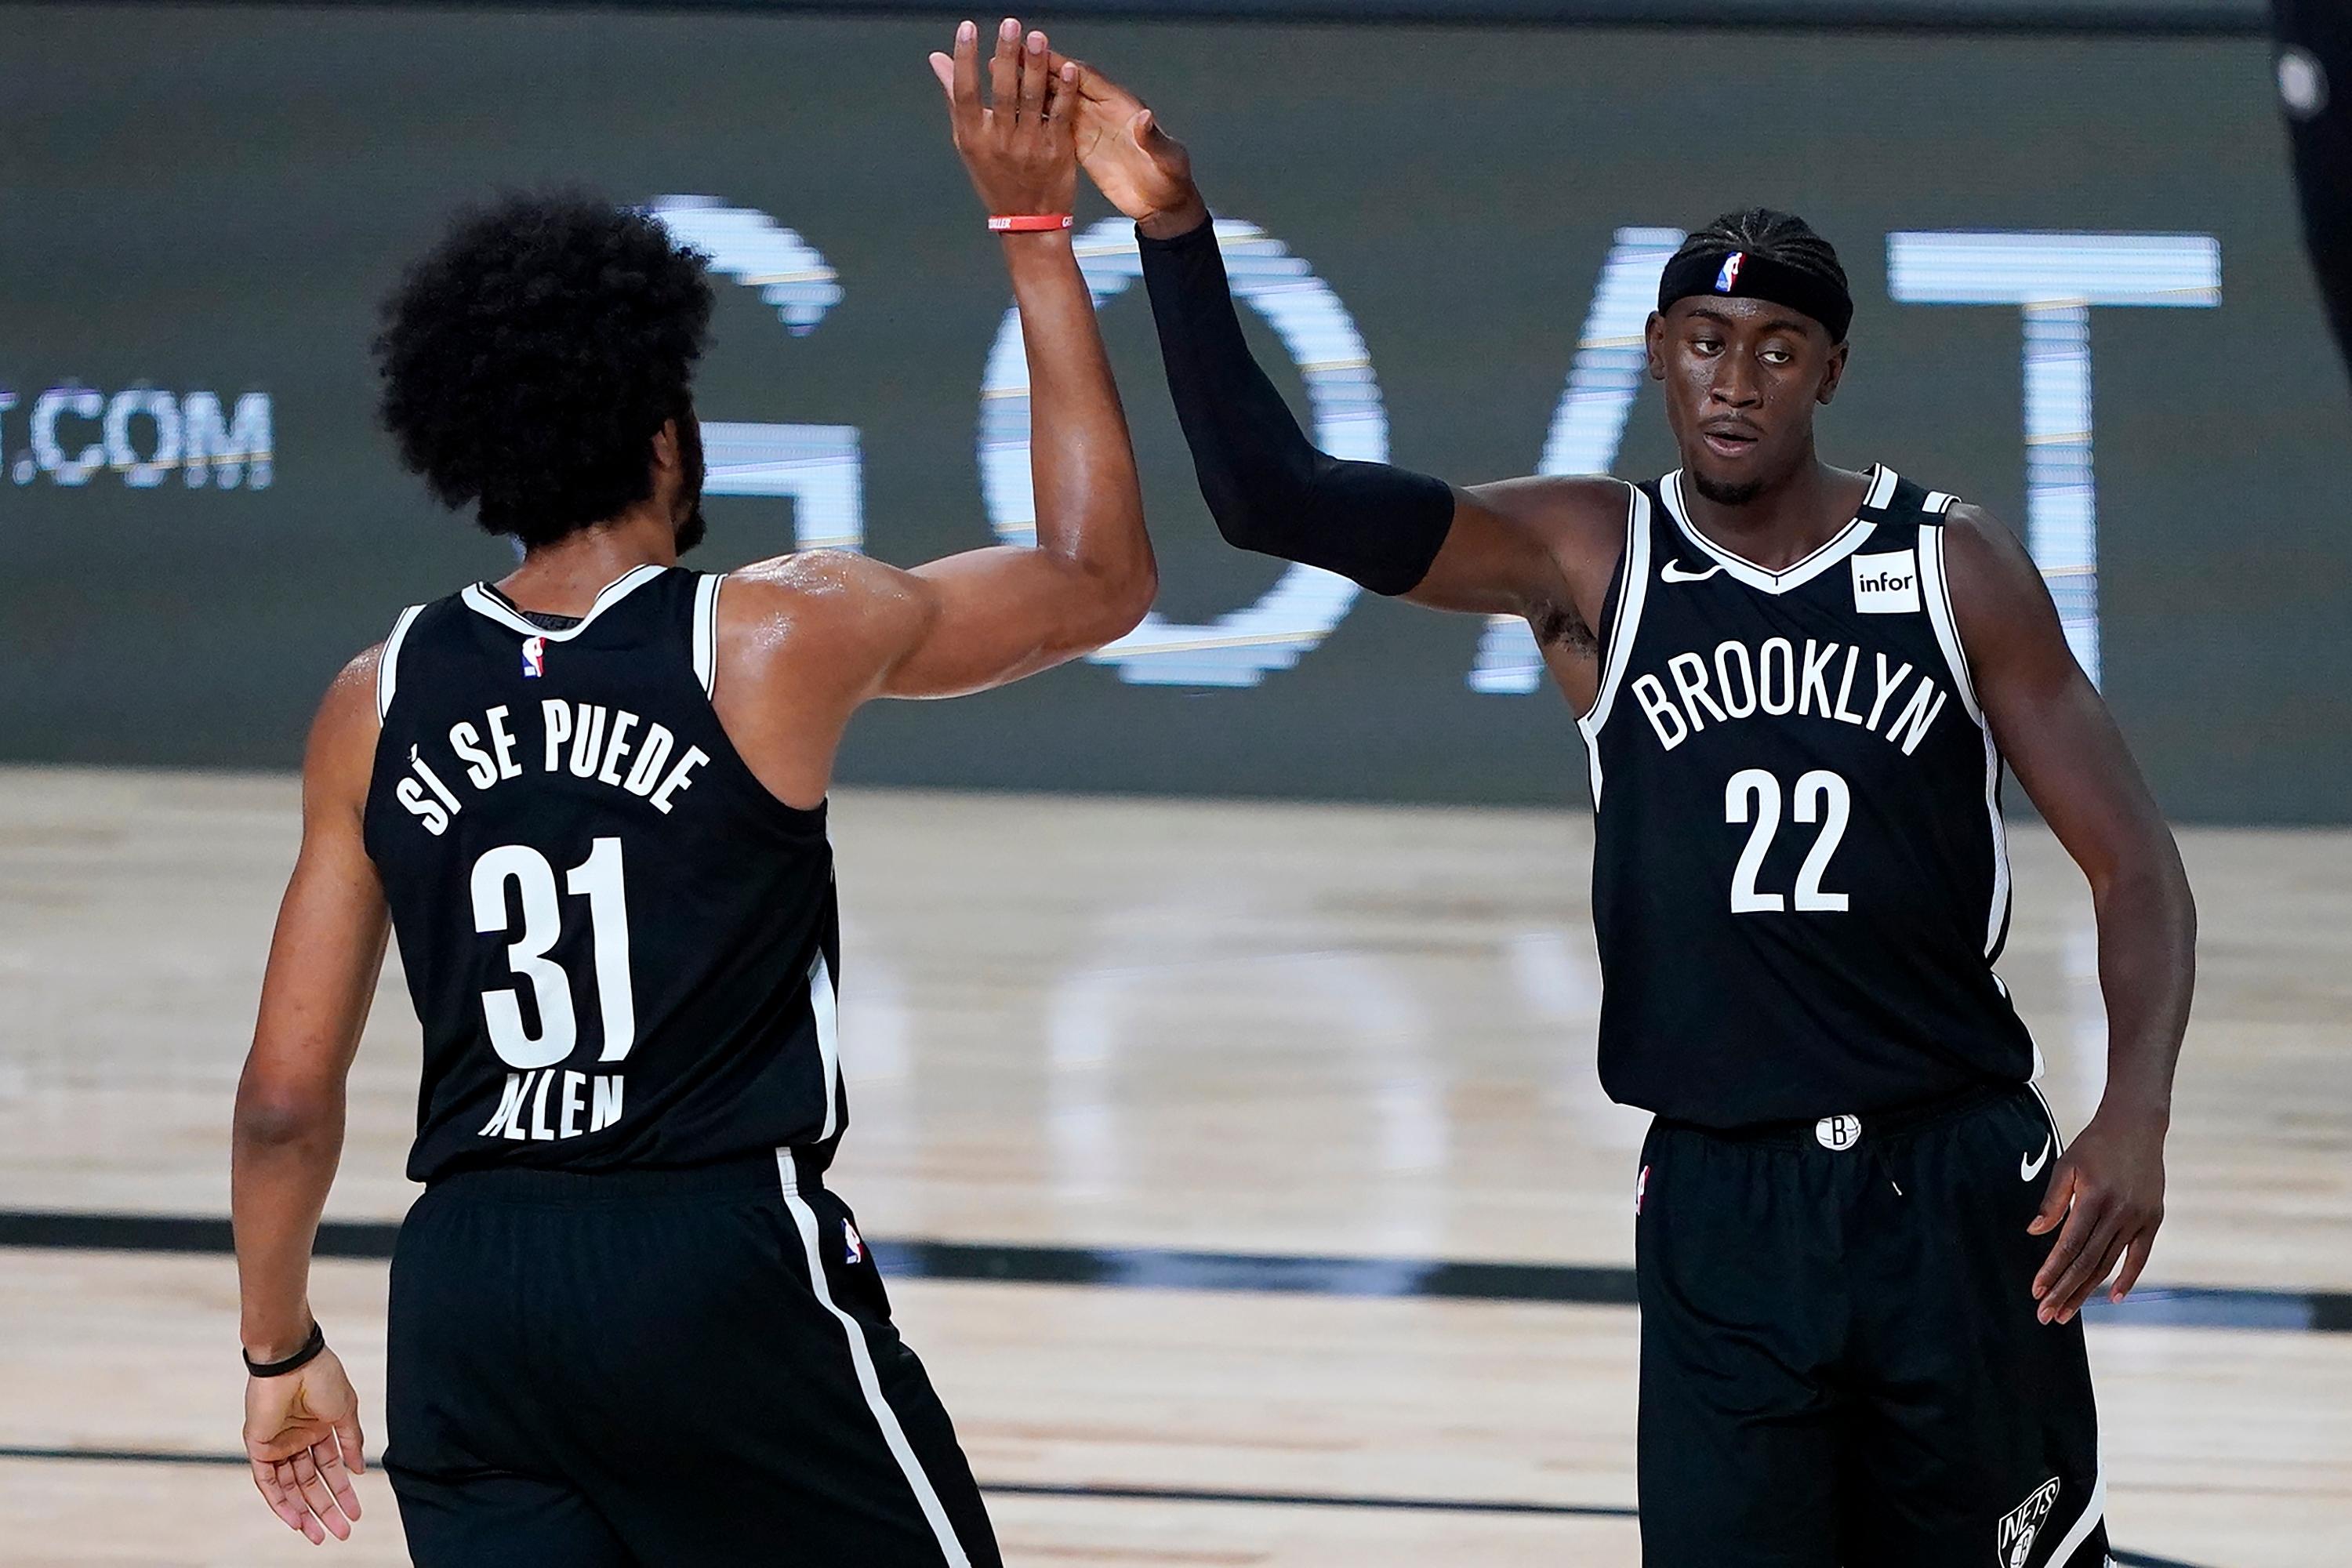 Brooklyn Nets' Jarrett Allen (31) and Caris LeVert (22) react after a play against the Sacramento Kings during the first half of an NBA basketball game at The Arena. / Ashley Landis- Pool Photo